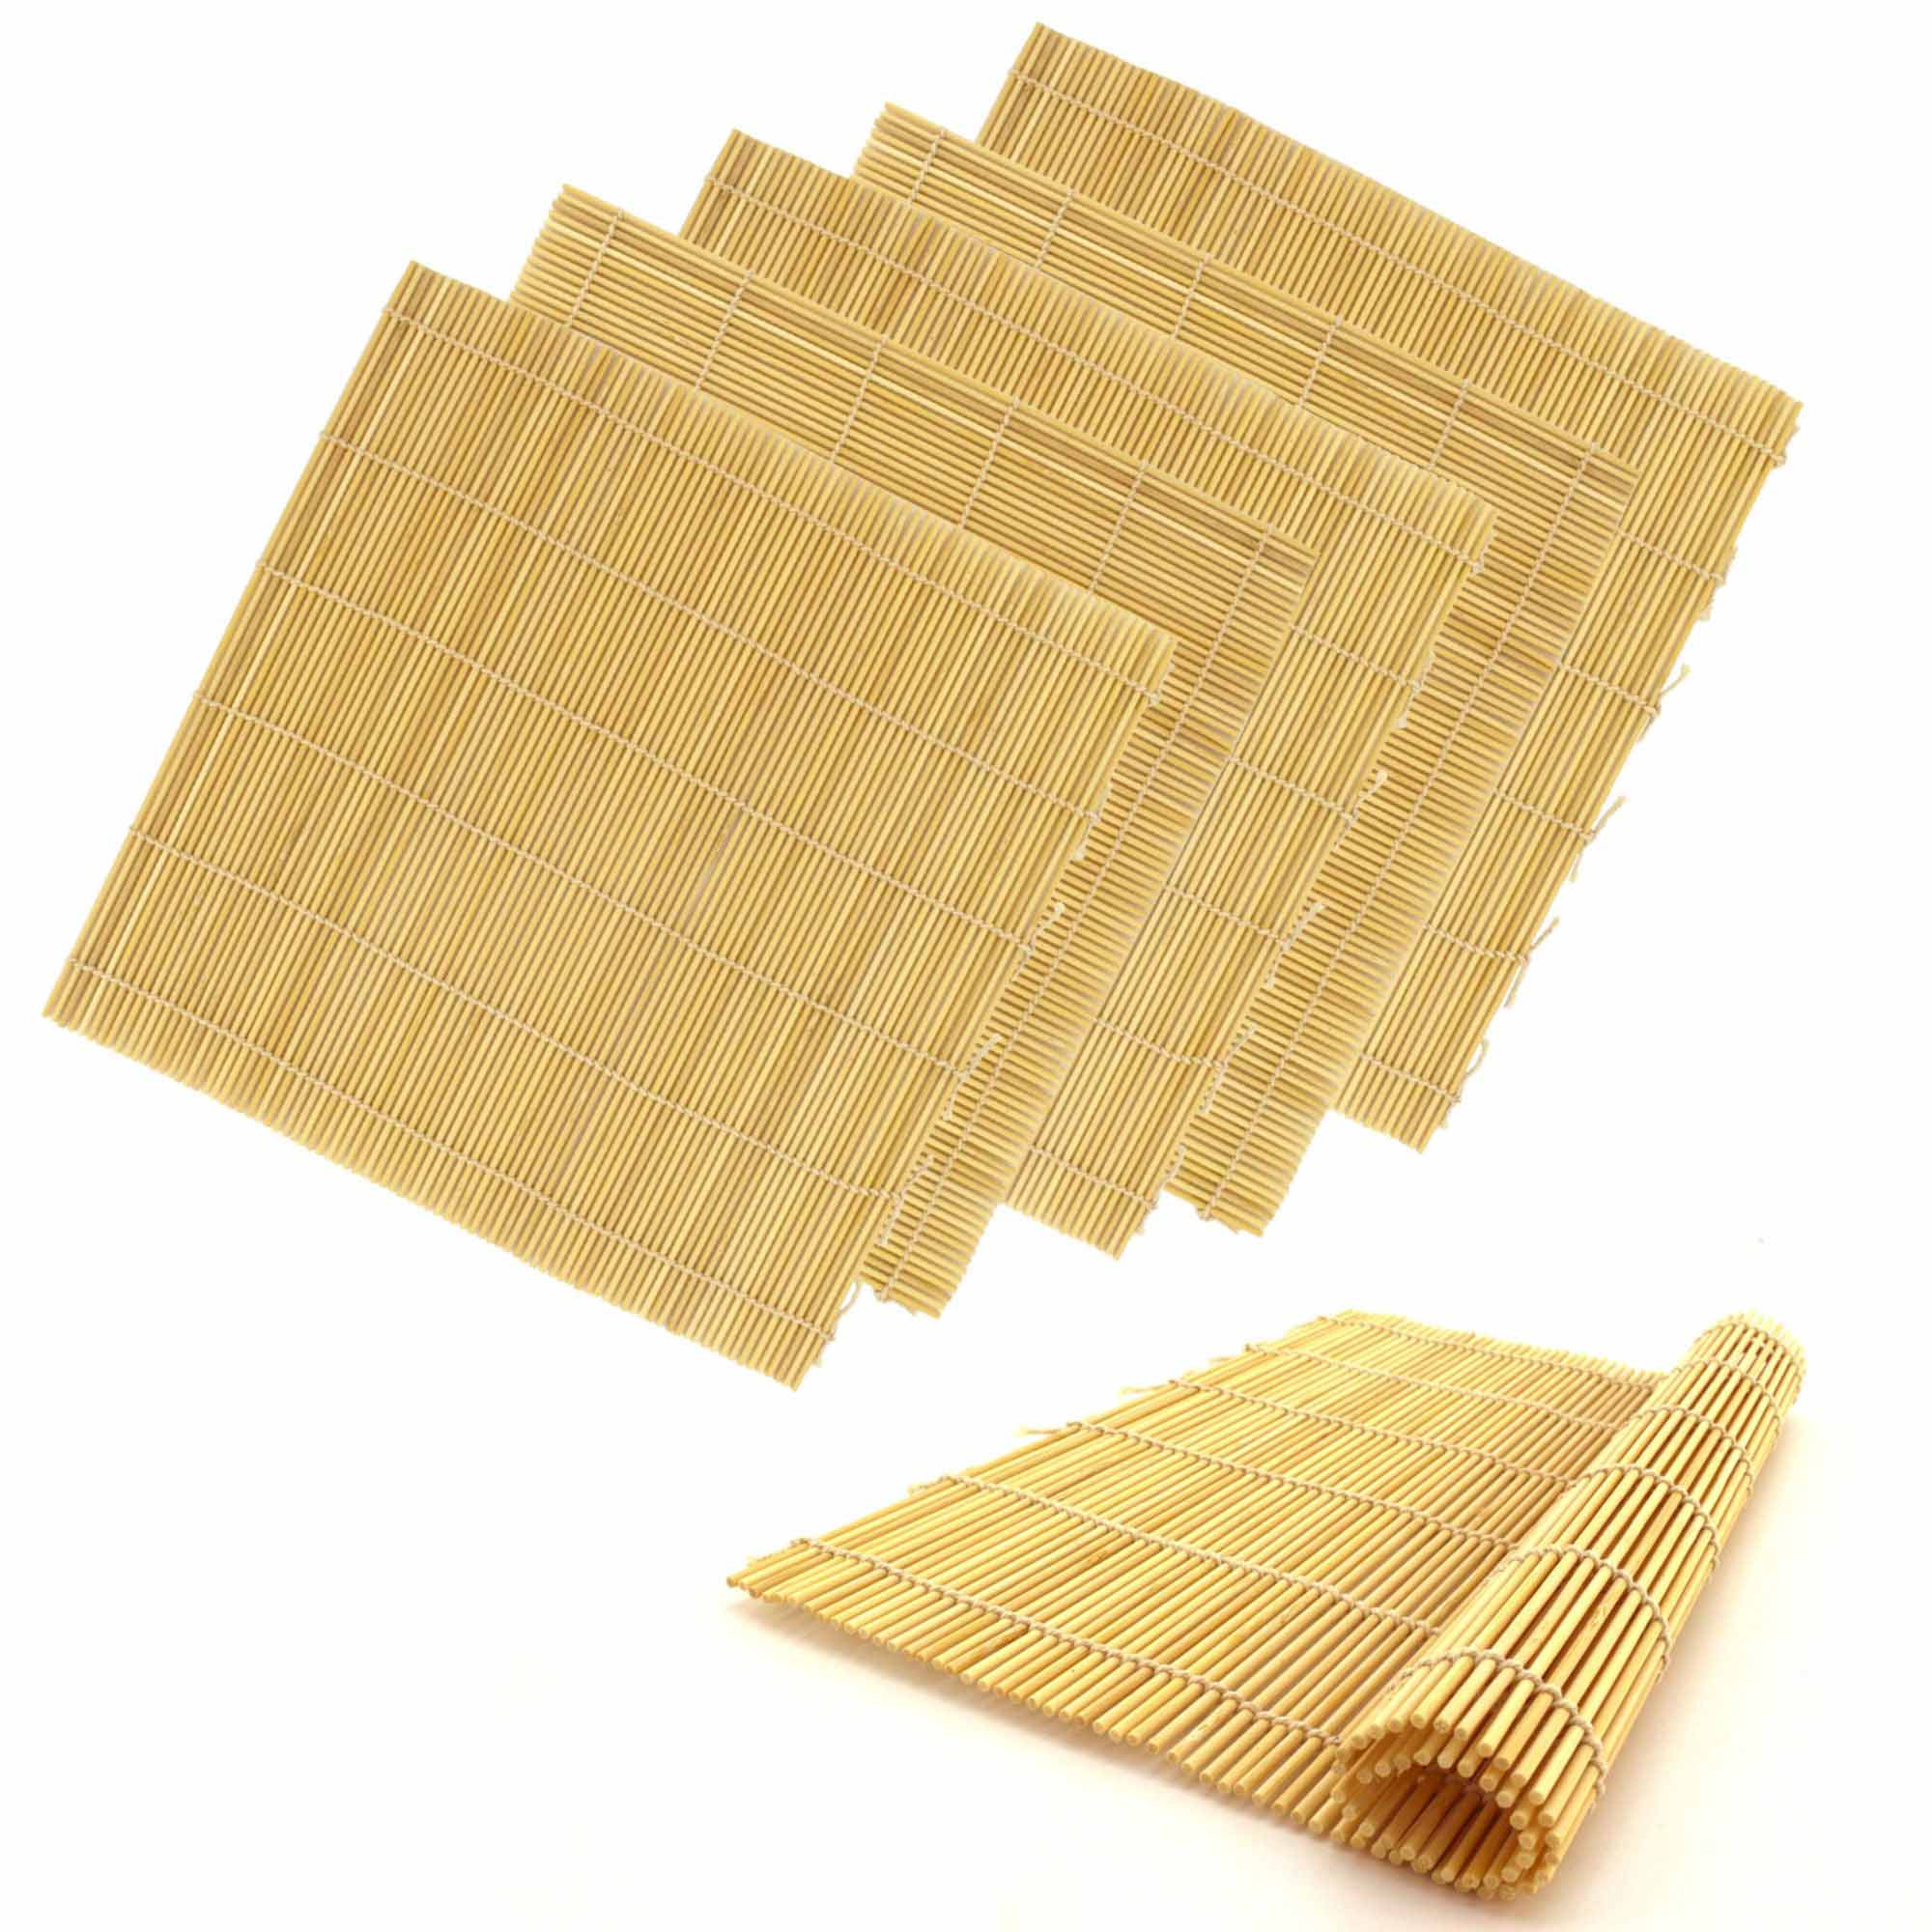 Misc Bamboo Sushi Mat with Skin - Each